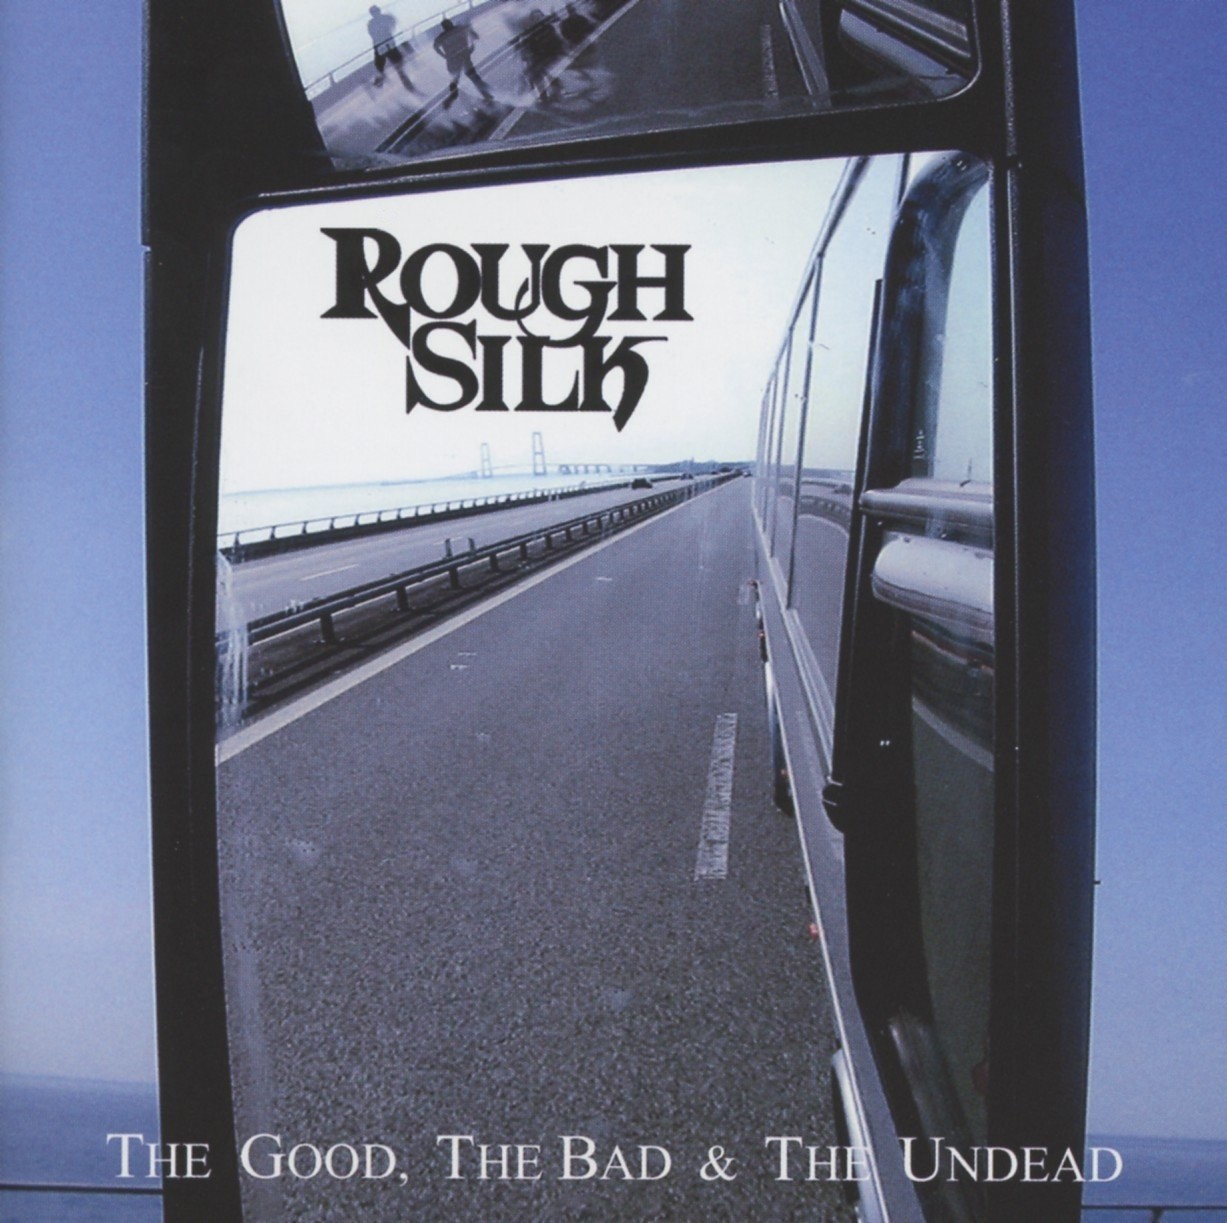 Rough Silk - The Good, the Bad & the Undead (2012) Cover